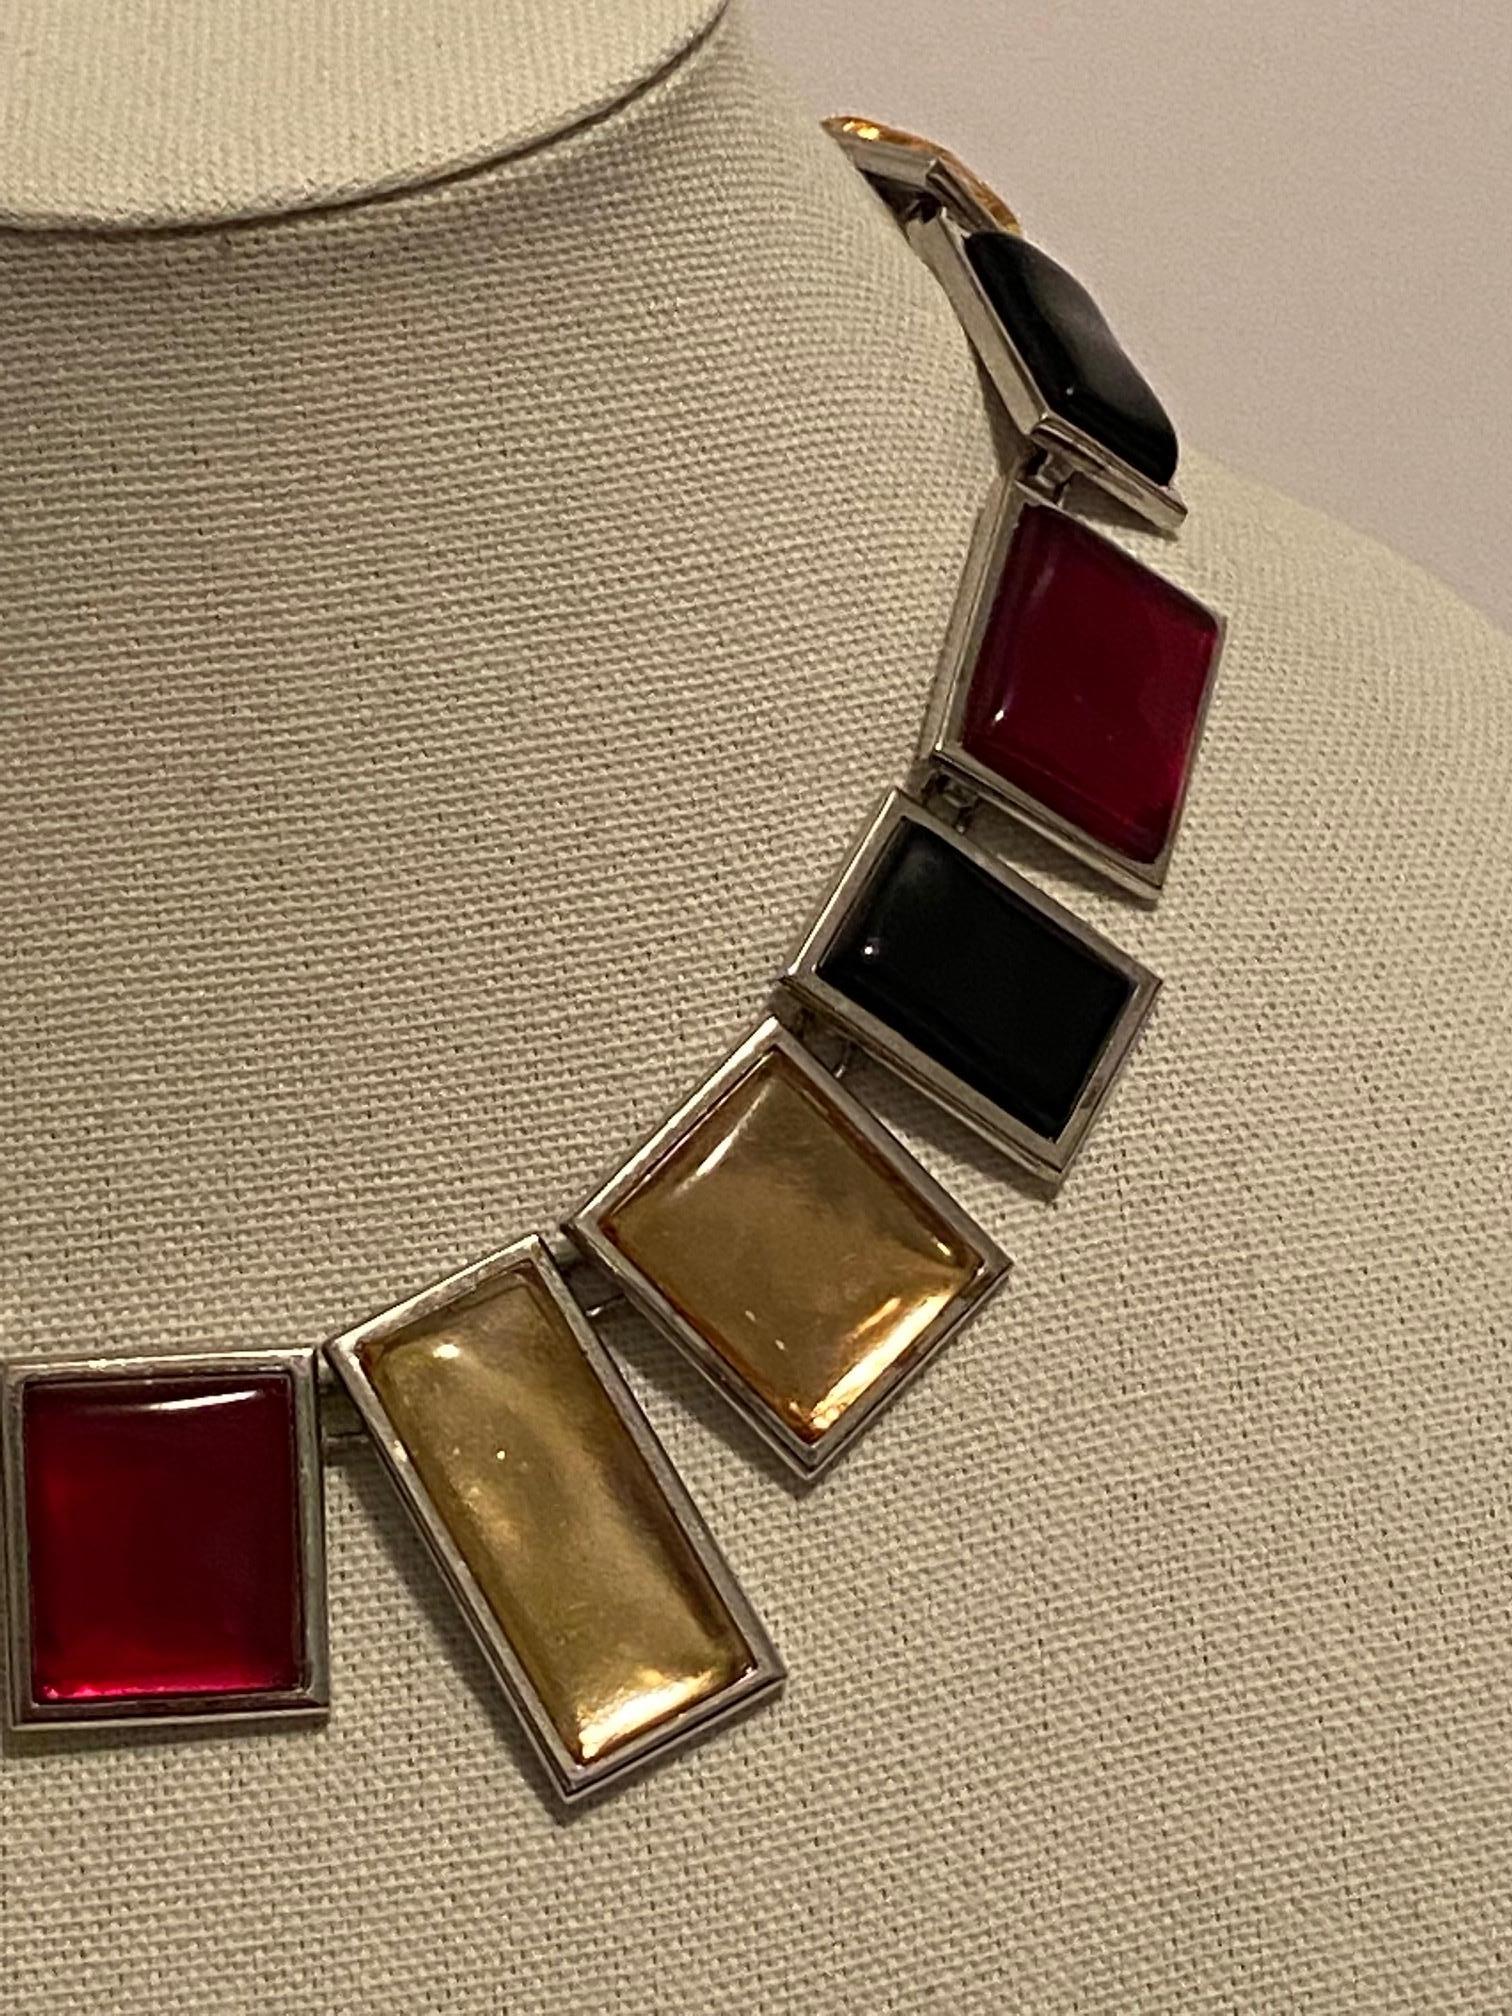 Yves Saint Laurent by Robert Goossens Numbered Limited Edition 1980s Necklace 10